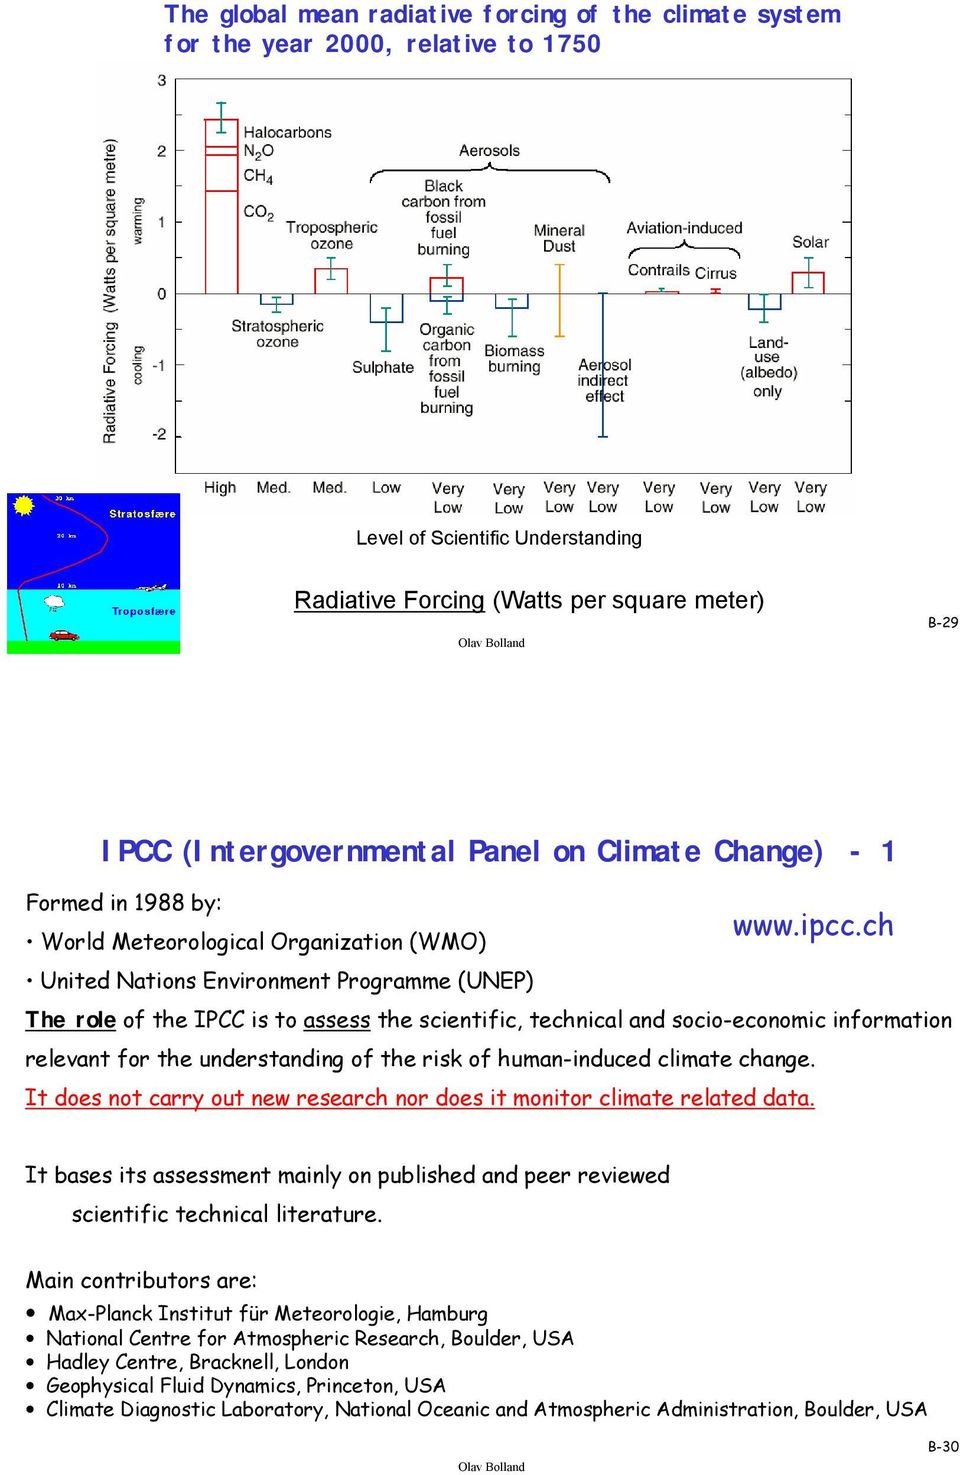 ch The role of the IPCC is to assess the scientific, technical and socio-economic information relevant for the understanding of the risk of human-induced climate change.